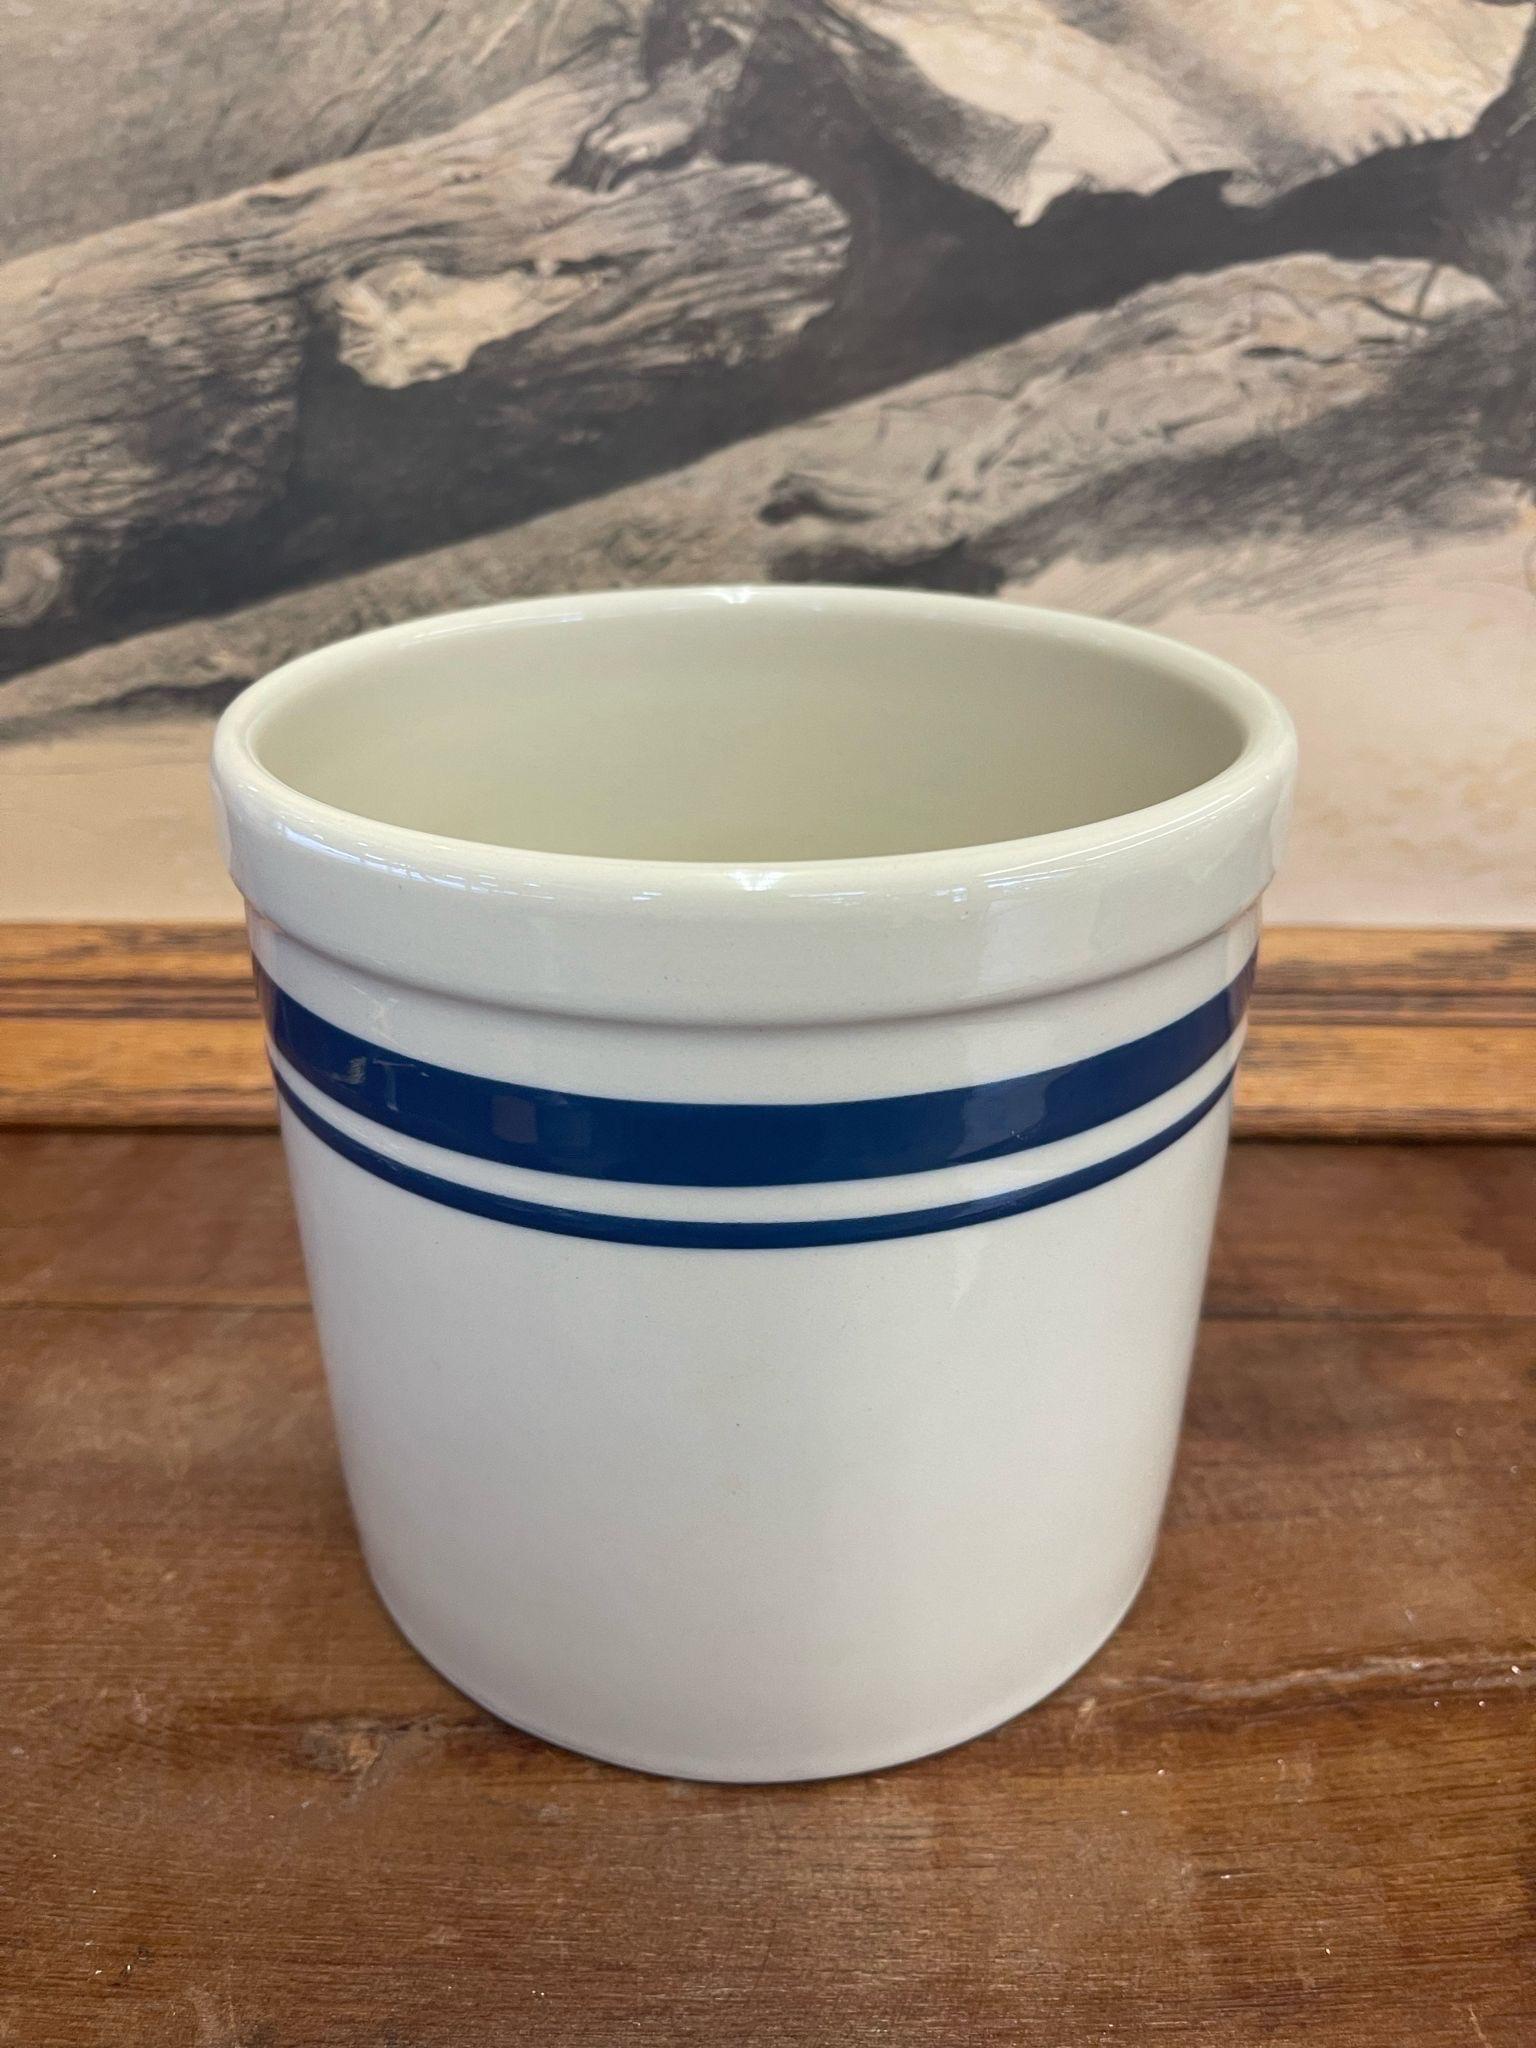 Late 20th Century Vintage White and Blue Colored Ceramic Jar. For Sale